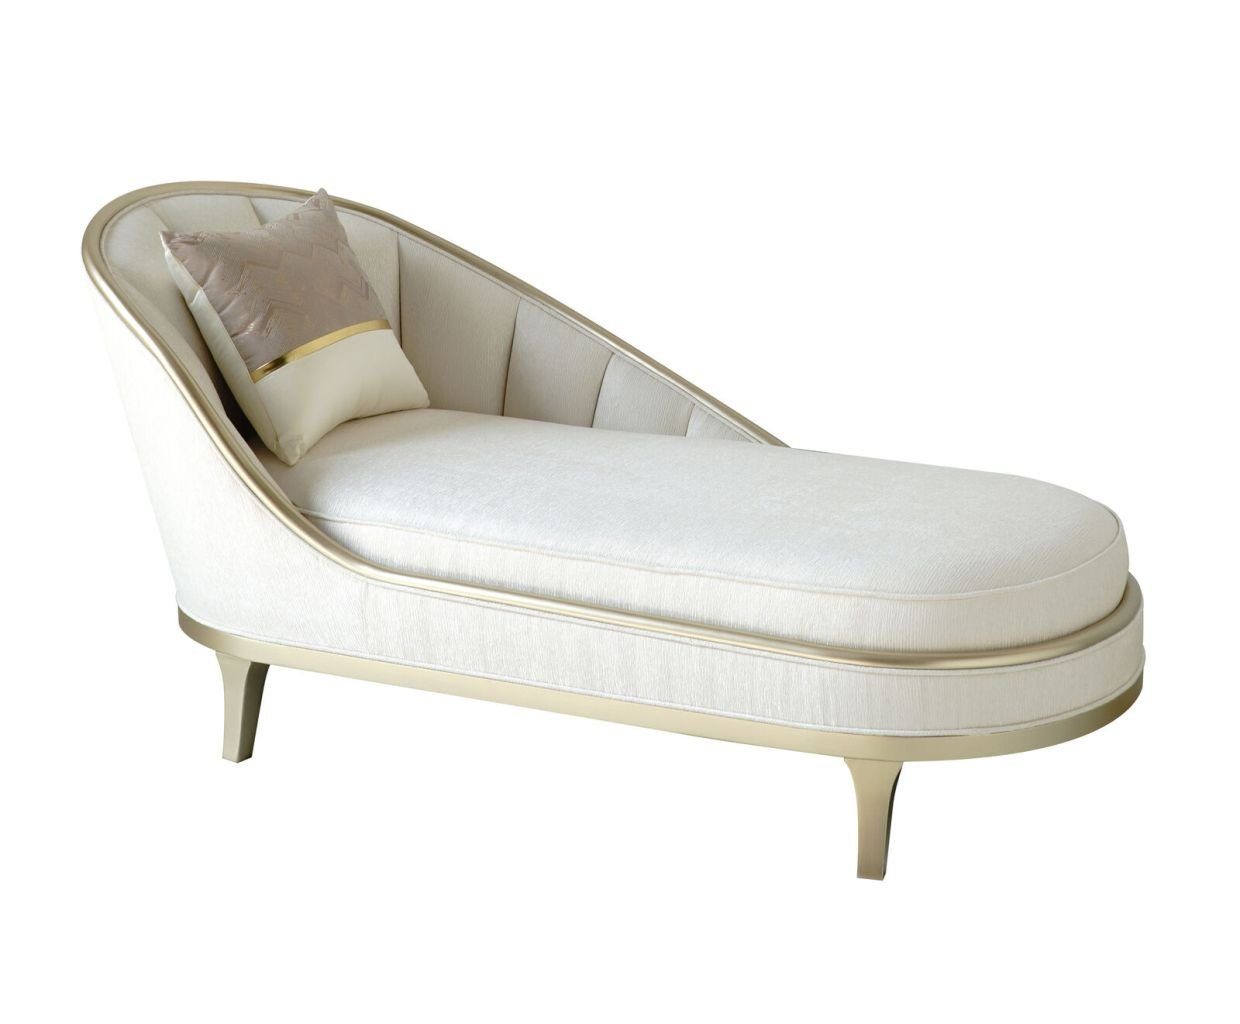 JVmoebel Chaiselongue Luxus Moderner Chaiselounge Liege Chaise Wohnzimmer Couch, Made in Europe